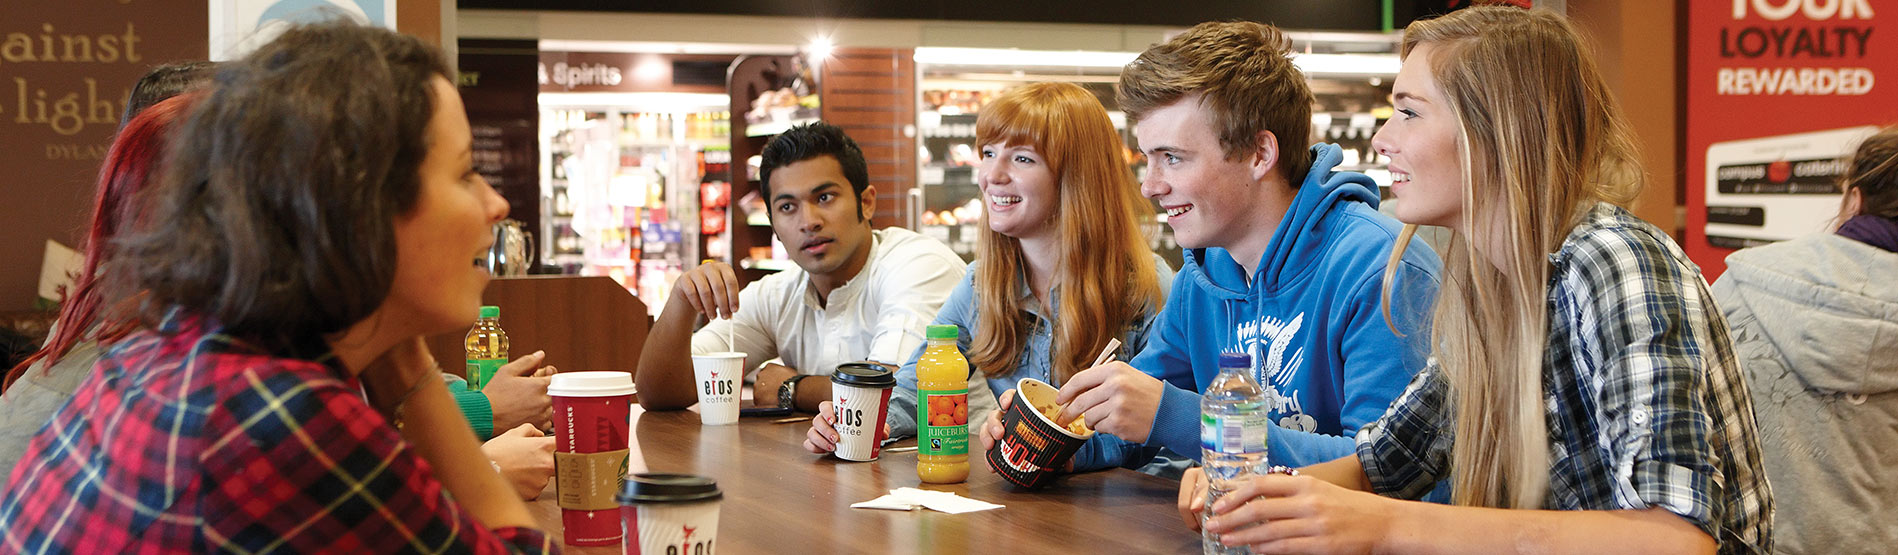 Students socialising during lunch in an on-campus cafe.